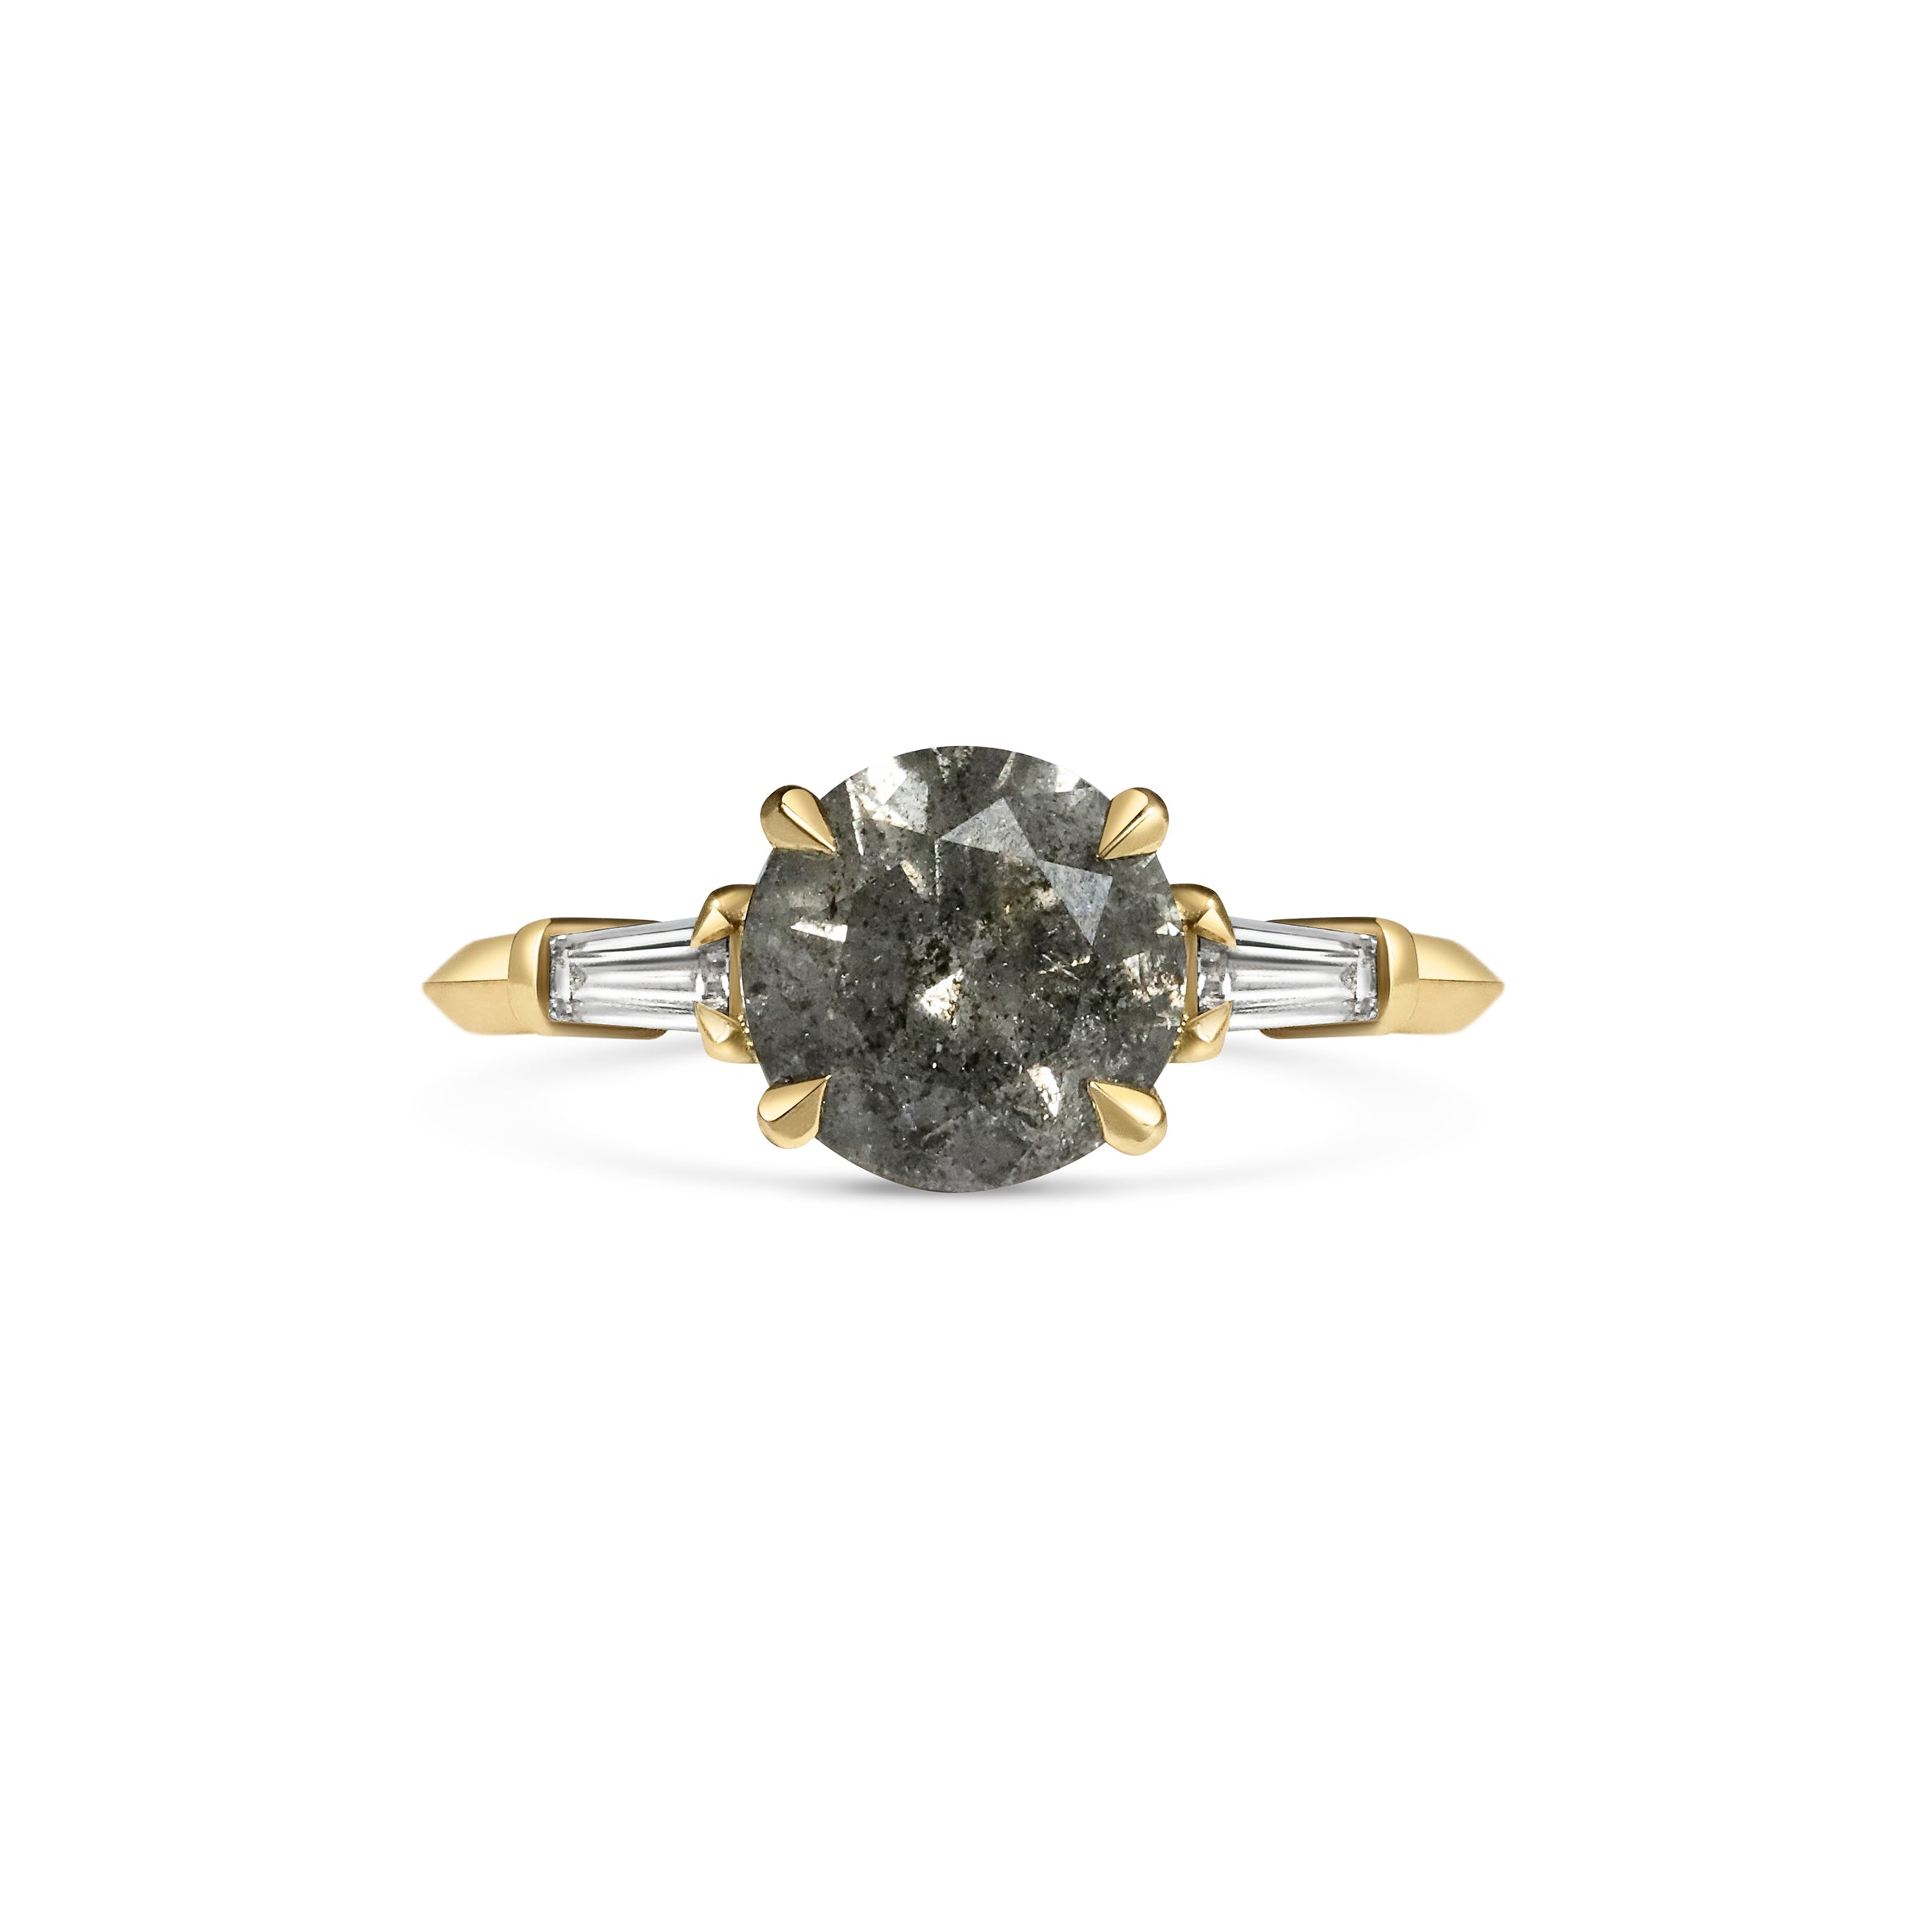 The Ariel Ring by East London jeweller Rachel Boston | Discover our collections of unique and timeless engagement rings, wedding rings, and modern fine jewellery.